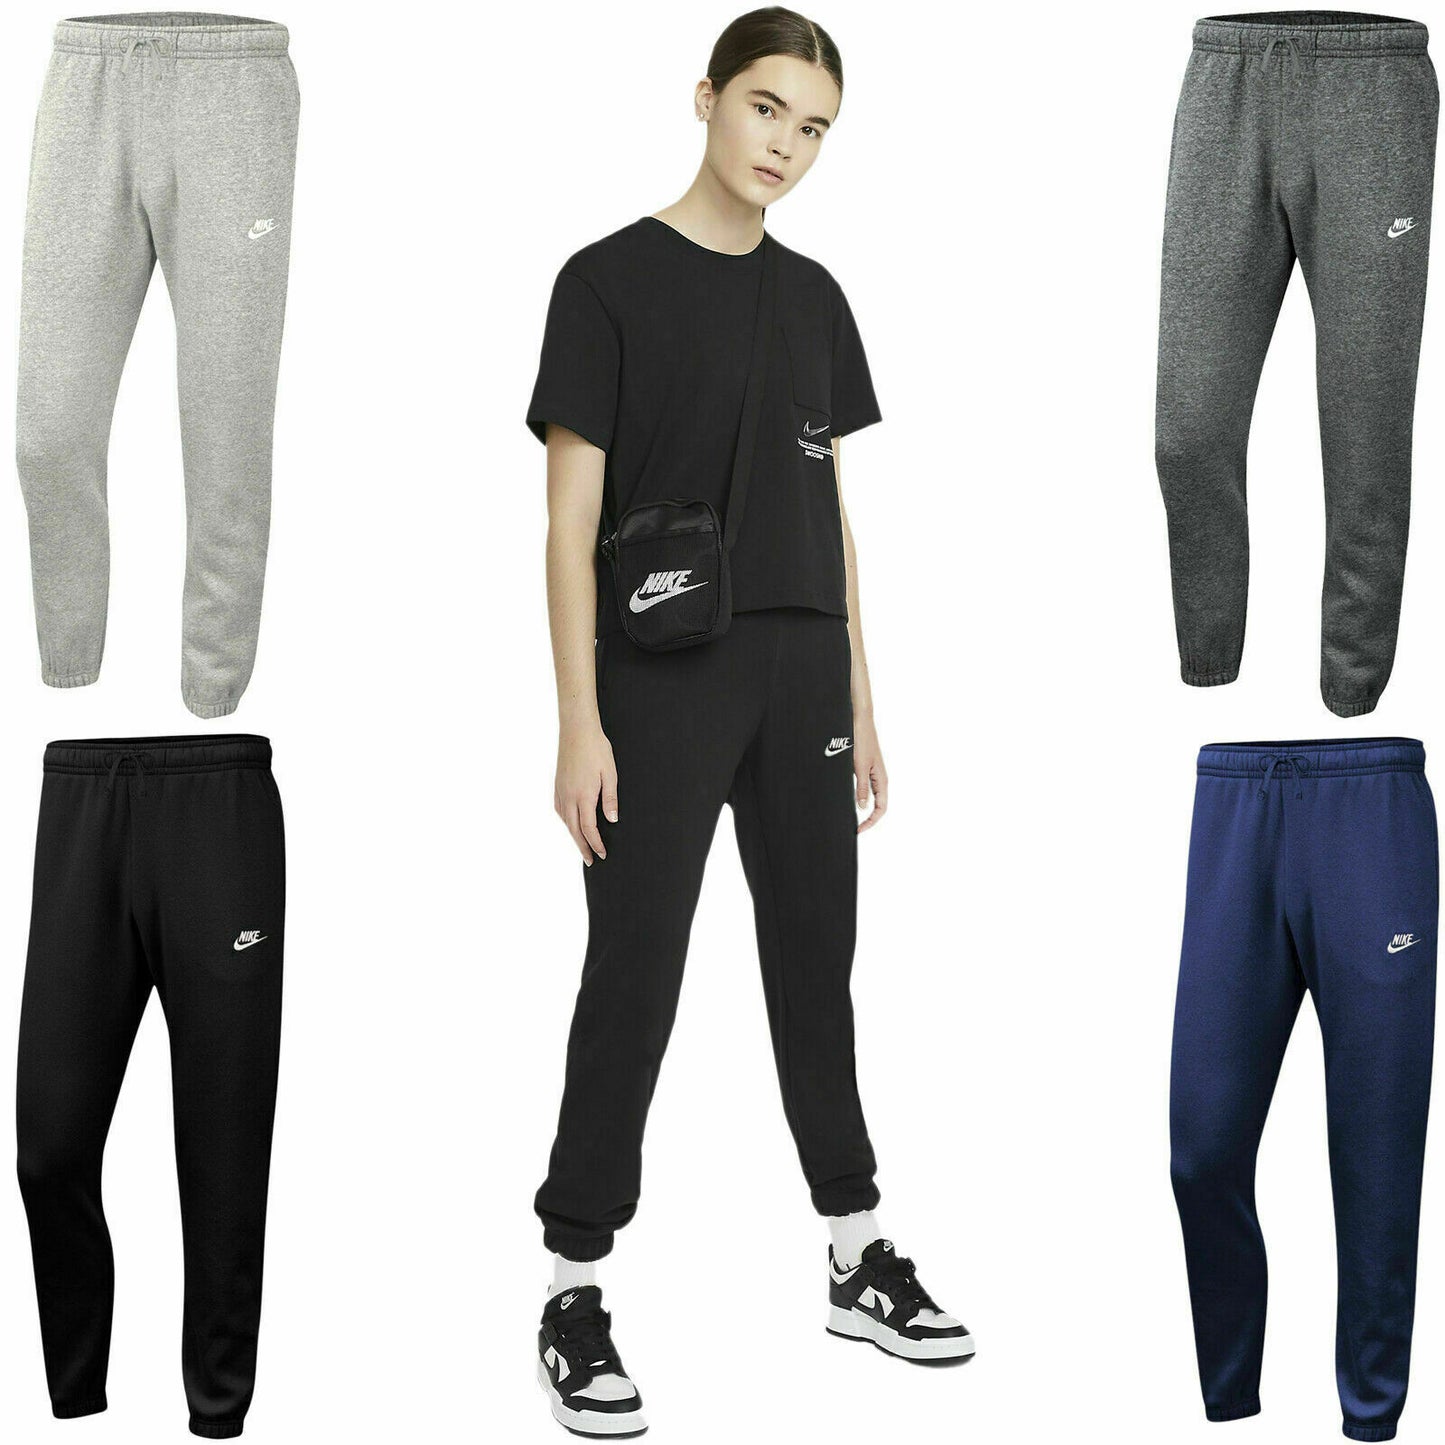 NIKE LADIES WOMENS JOG PANTS CASUAL JOGGERS JOGGING GYM BOTTOMS RUNNING TROUSERS